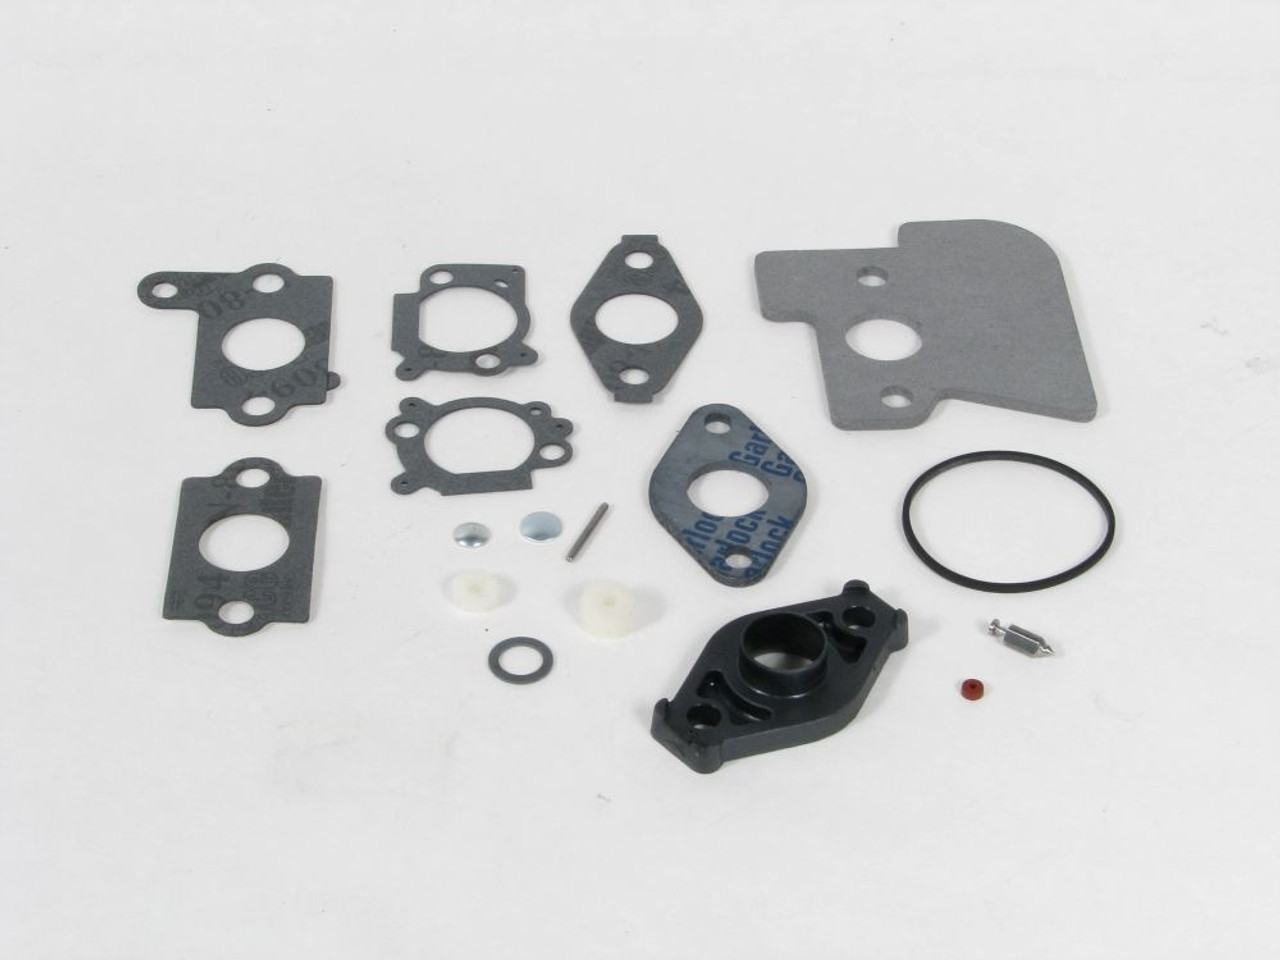 New Briggs And Stratton OEM Kit-Carb Overhaul Part Number 792383